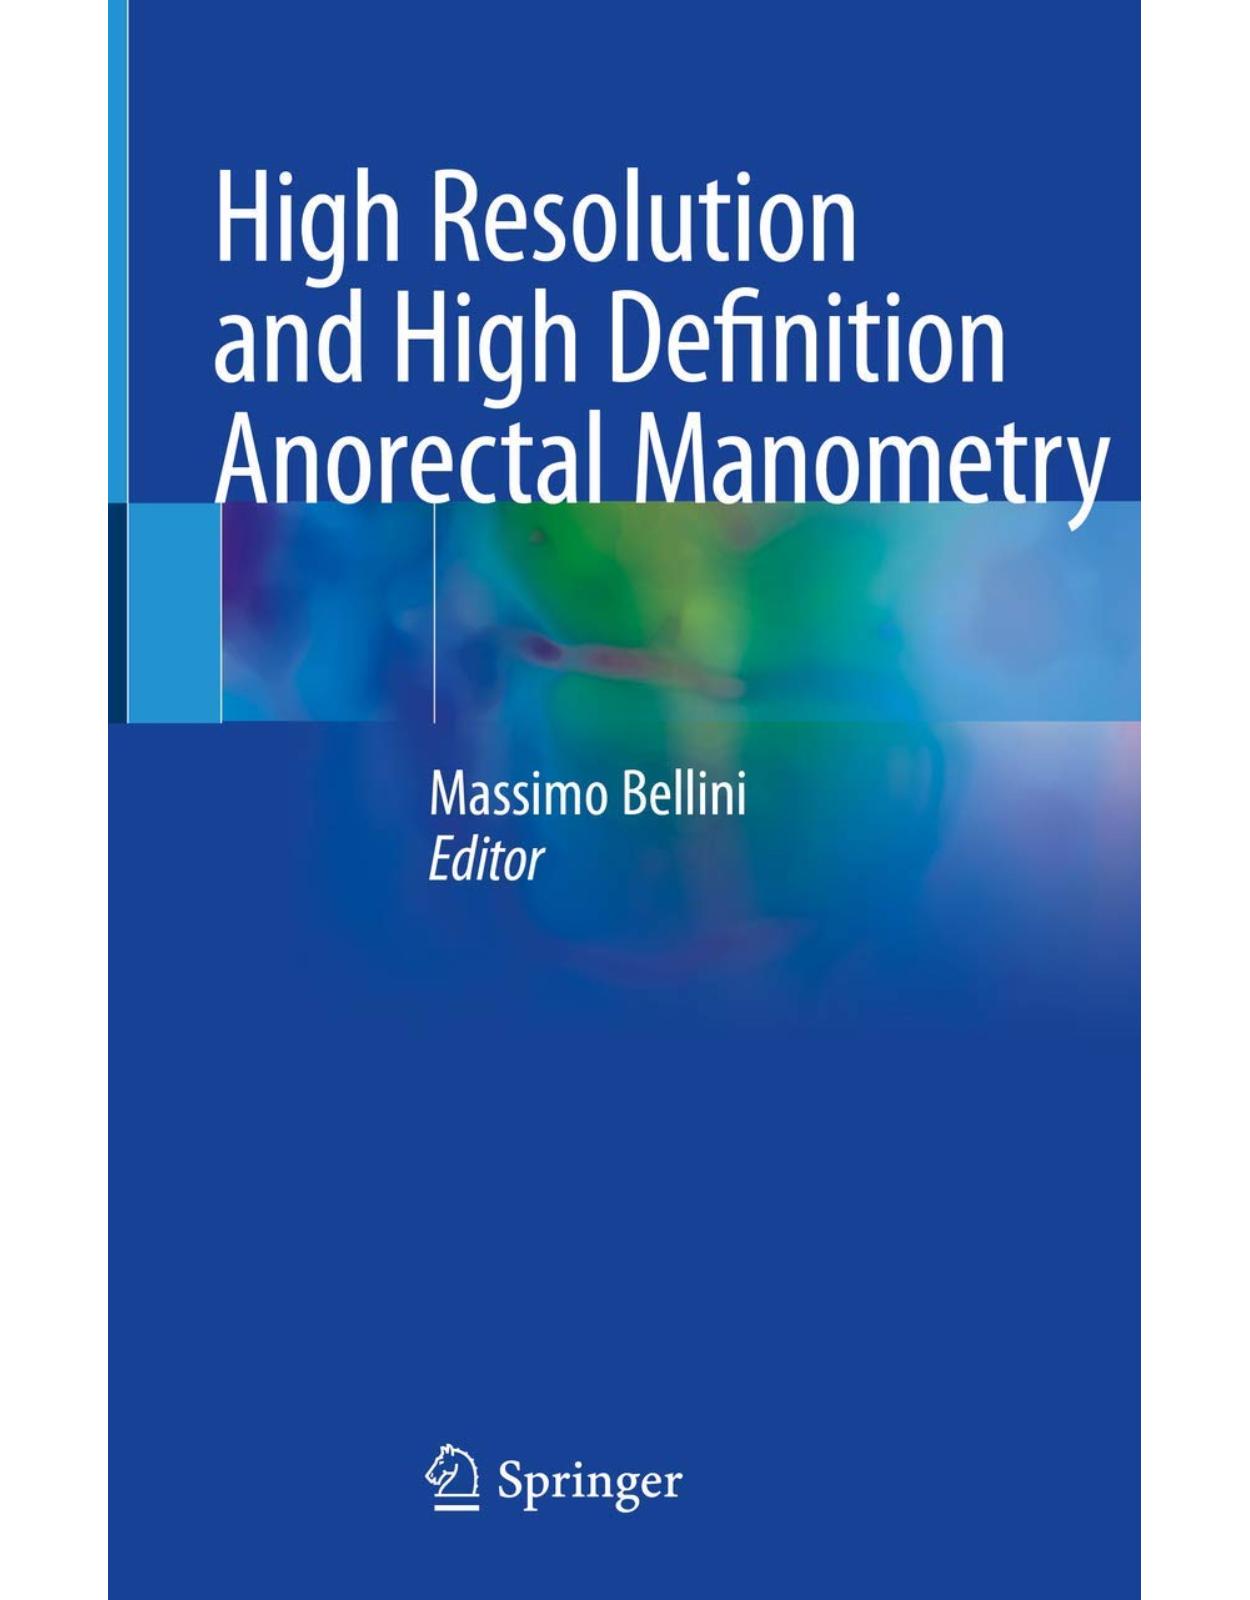 High Resolution and High Definition Anorectal Manometry